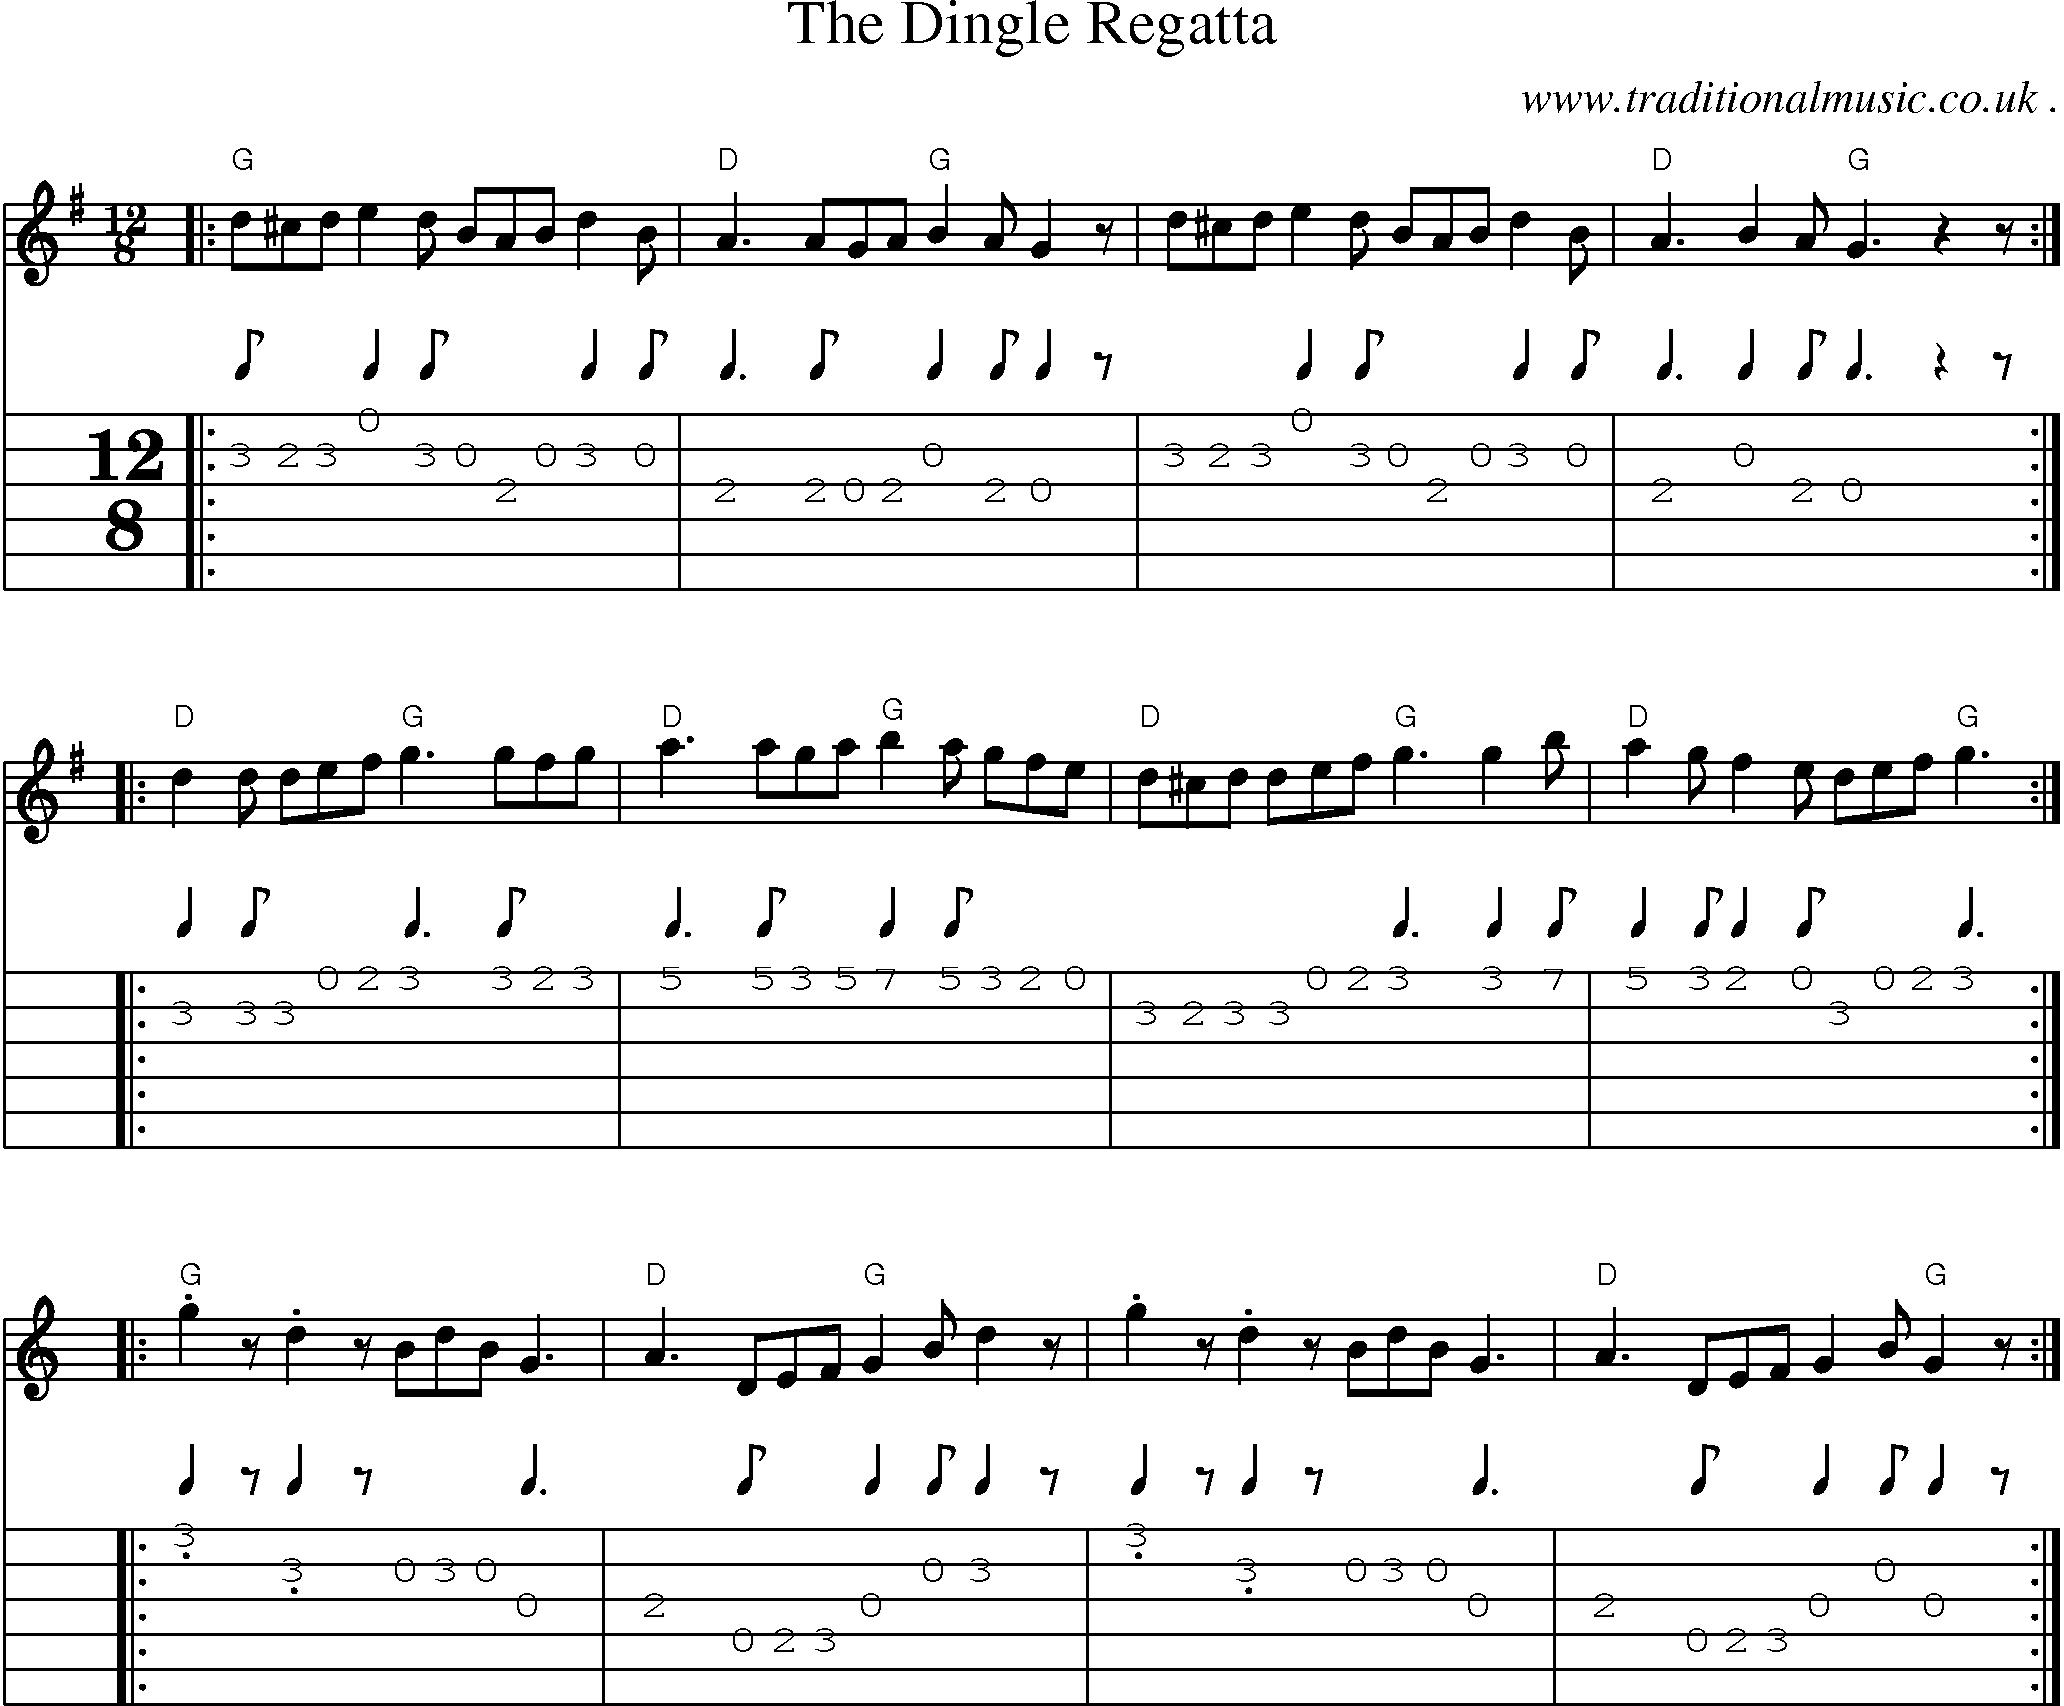 Music Score and Guitar Tabs for The Dingle Regatta